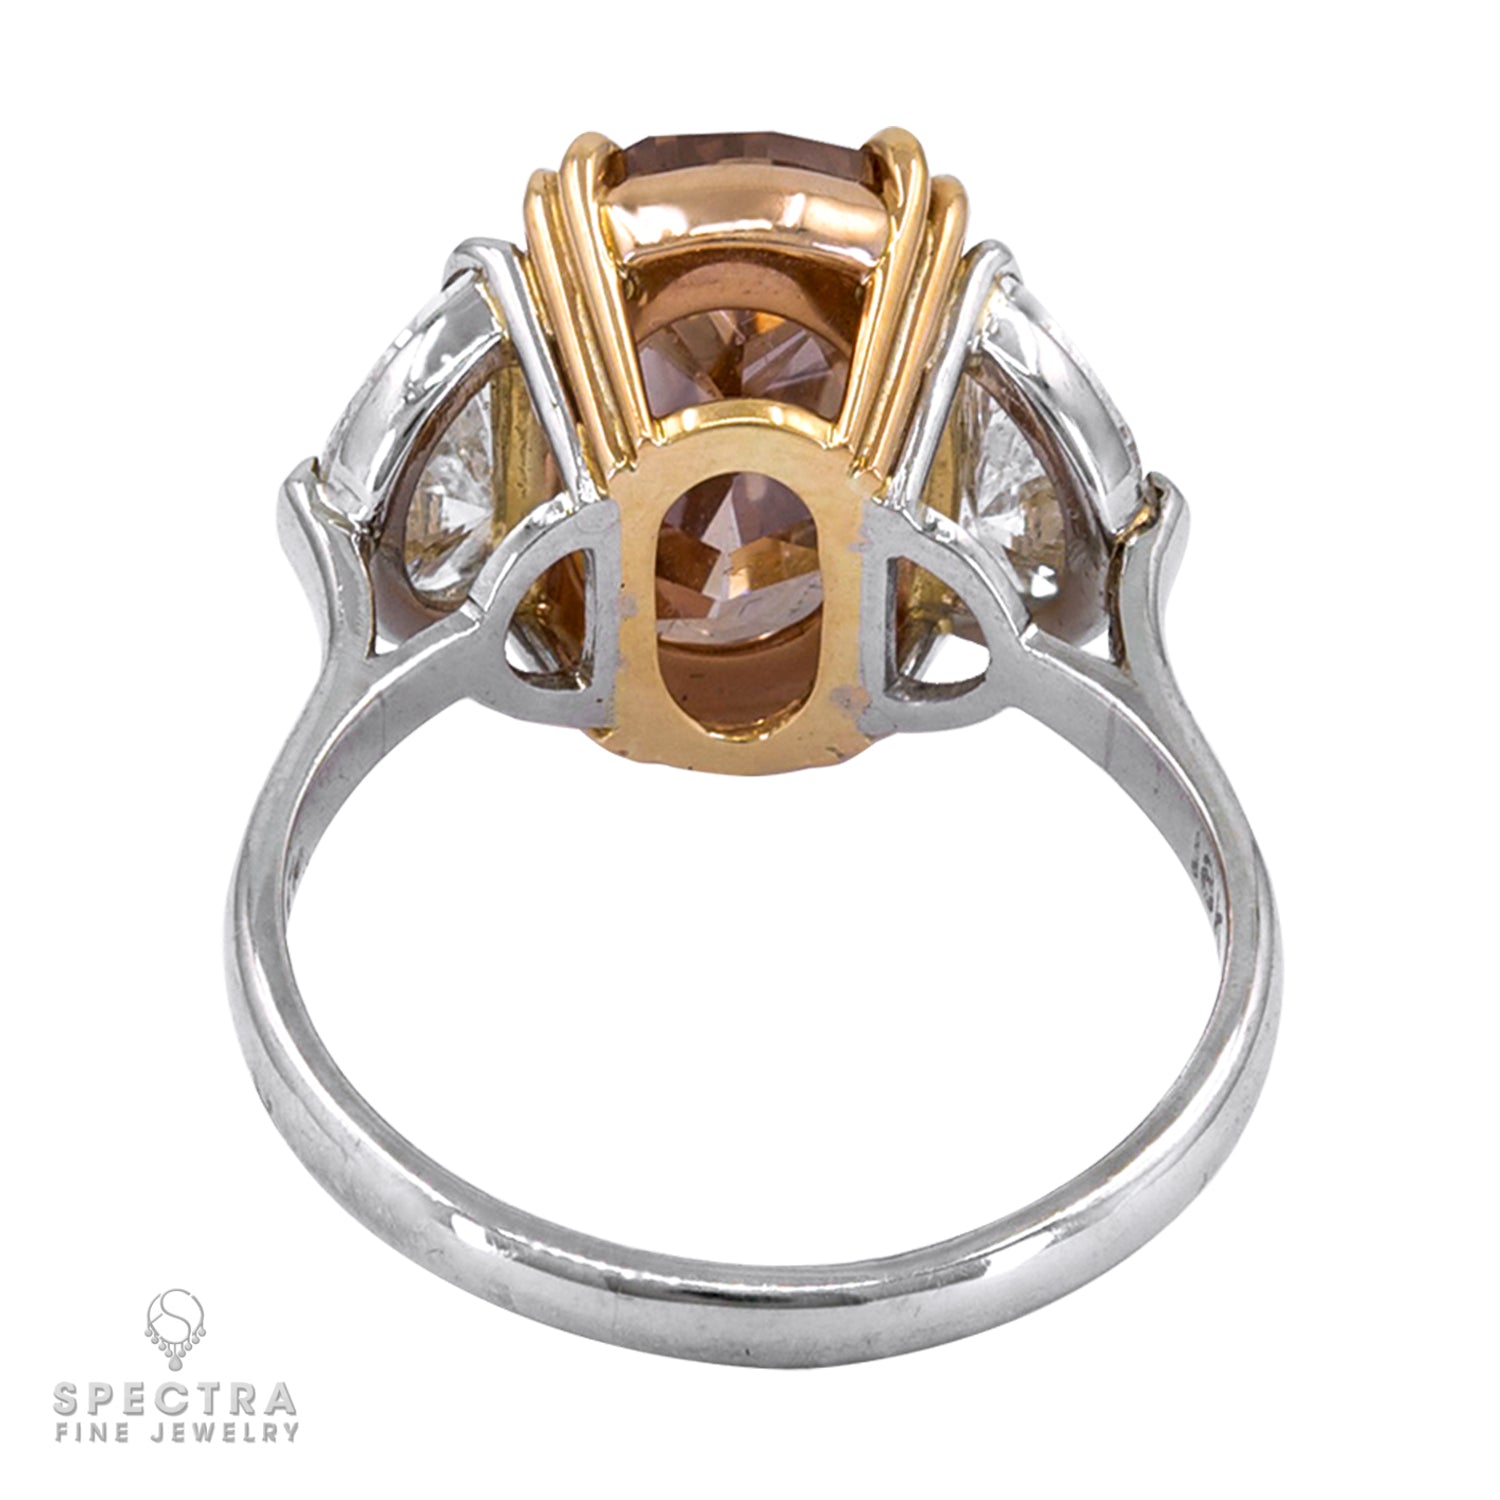 Spectra Fine Jewelry Colored Diamond and Diamond Ring with Fancy Brown-Orange Center Stone